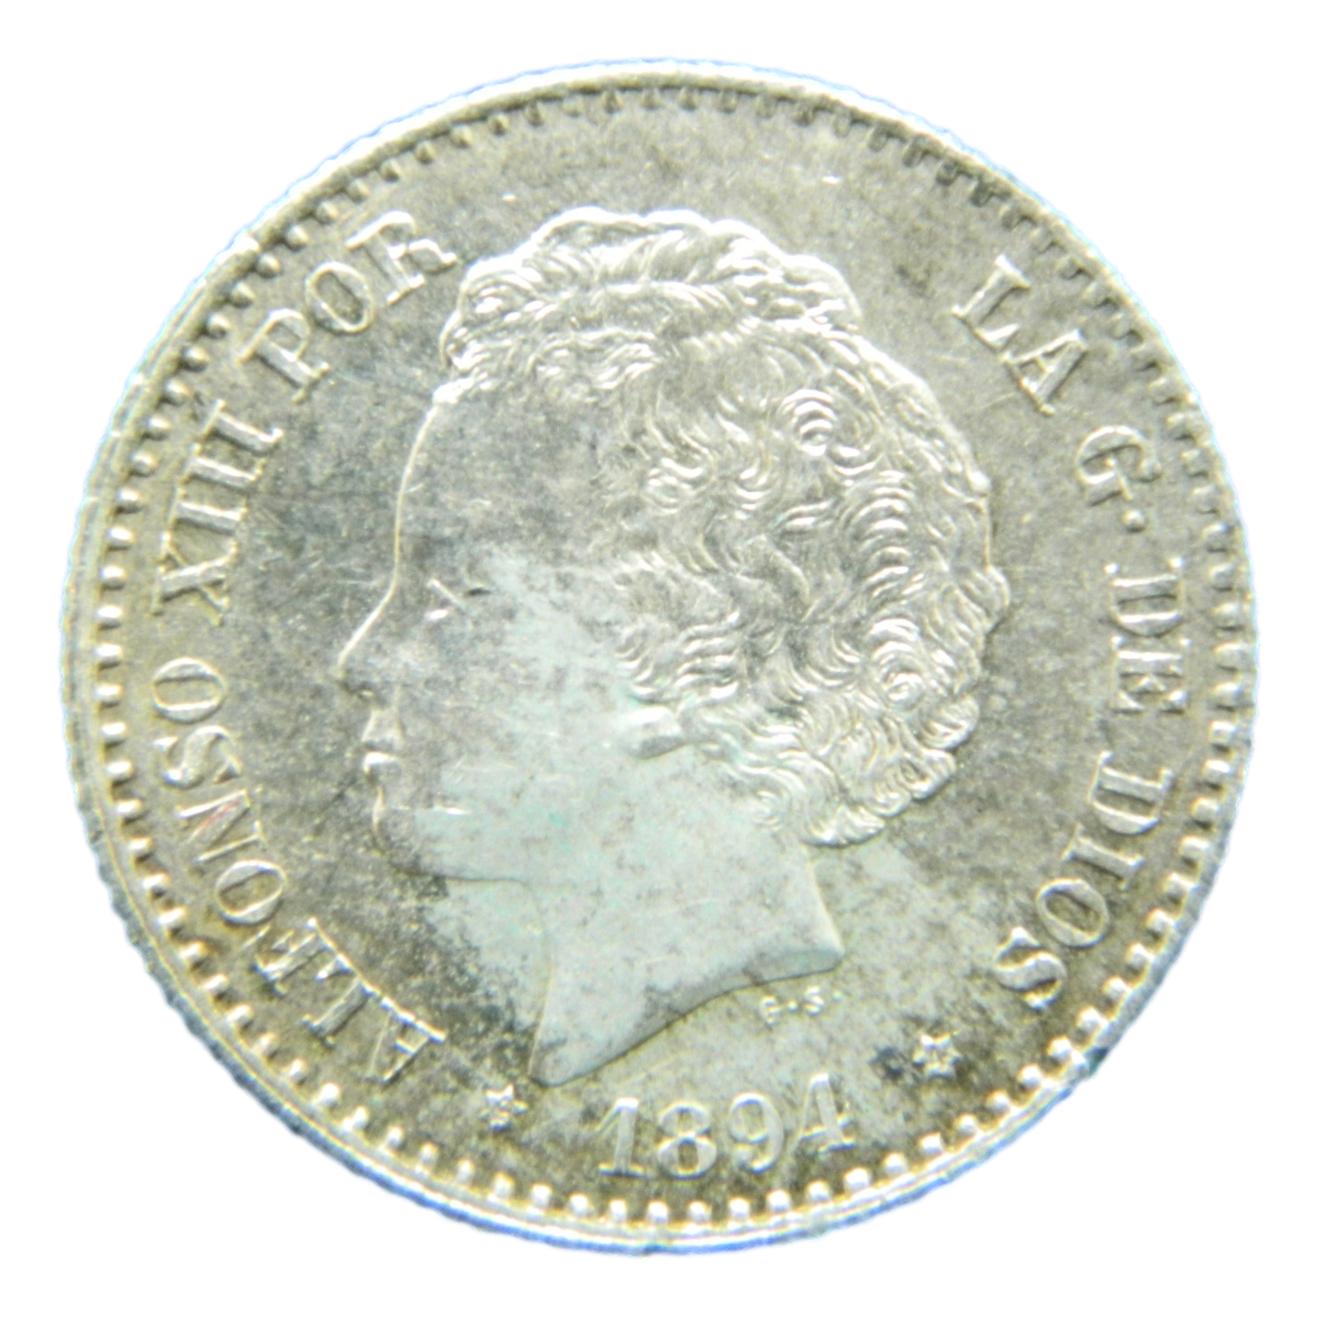 1894 *0-4 - ALFONSO XIII - 50 CENTIMOS - PLATA - S6